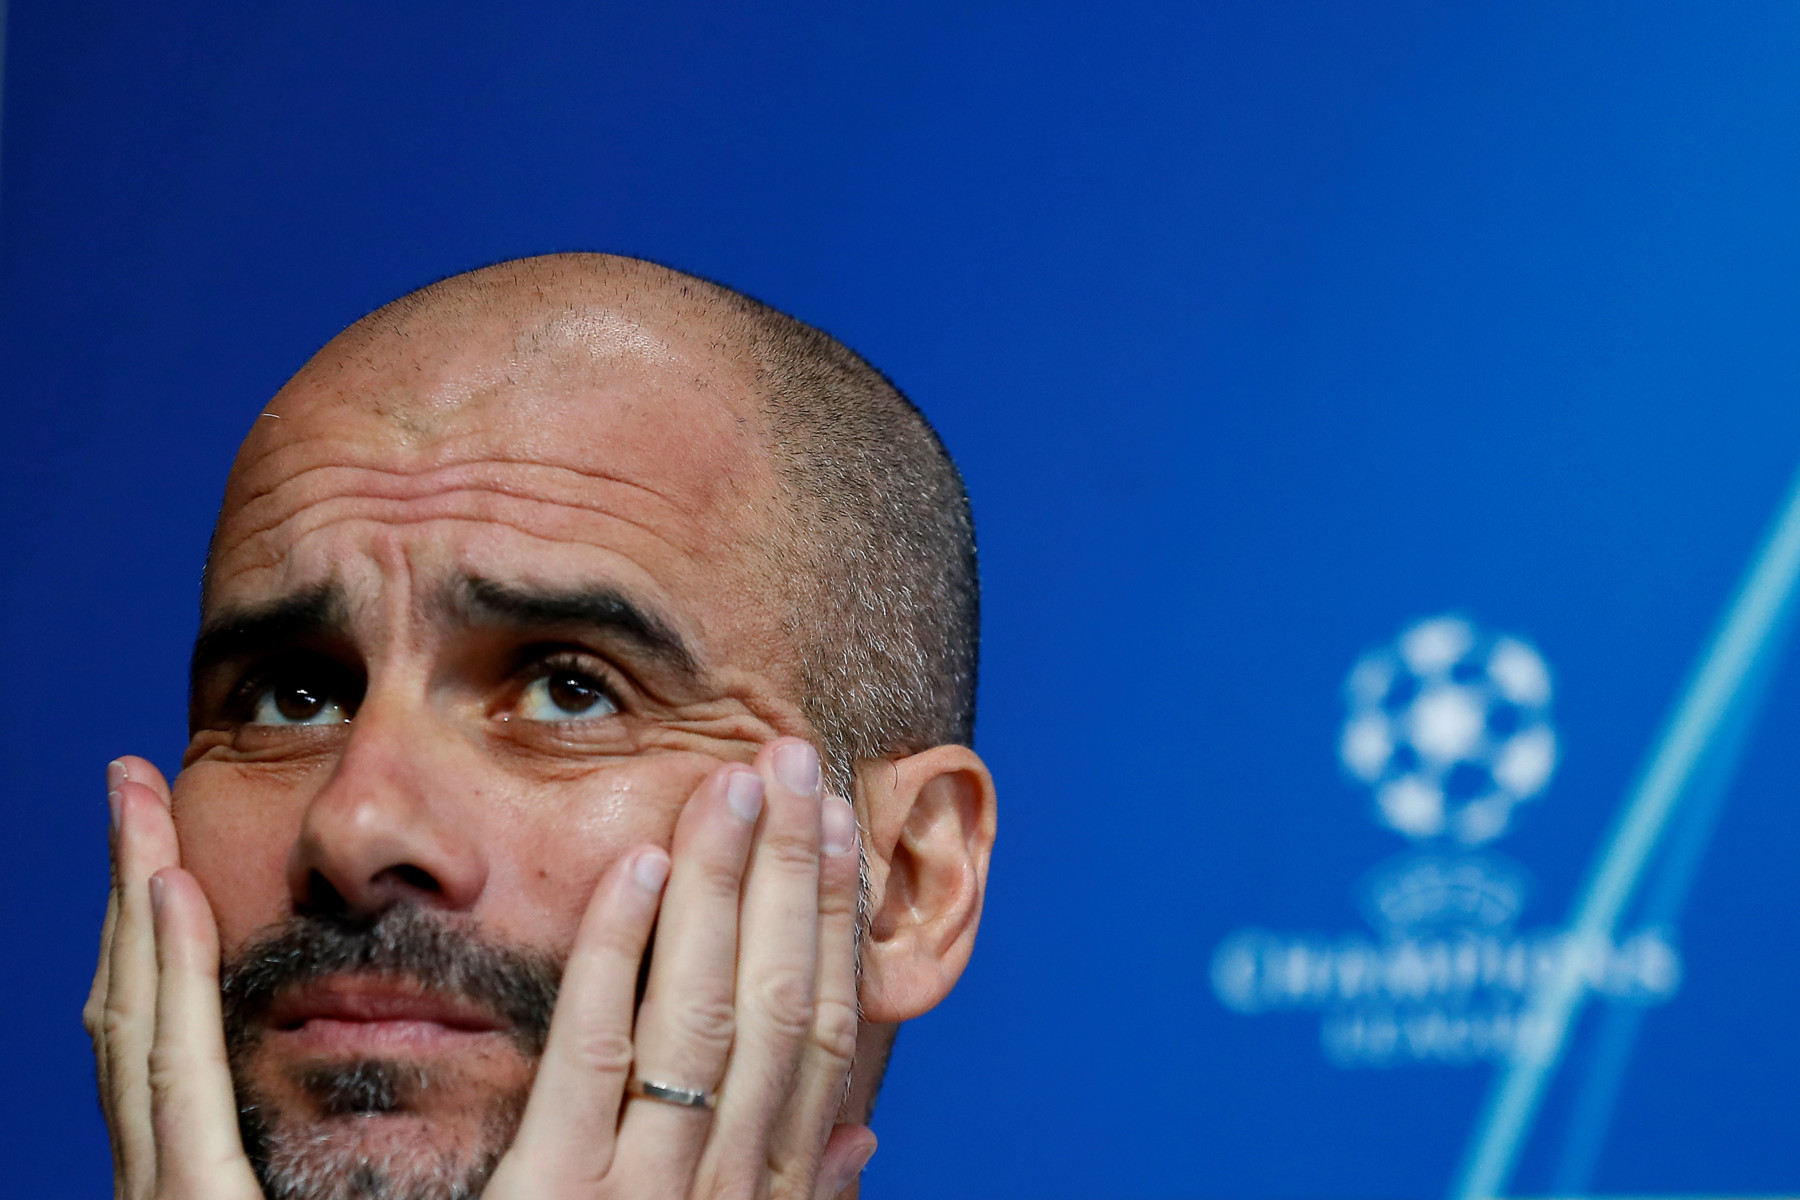 , Man City could miss out on 170MILLION after being booted out of the Champions League over serious FFP breaches